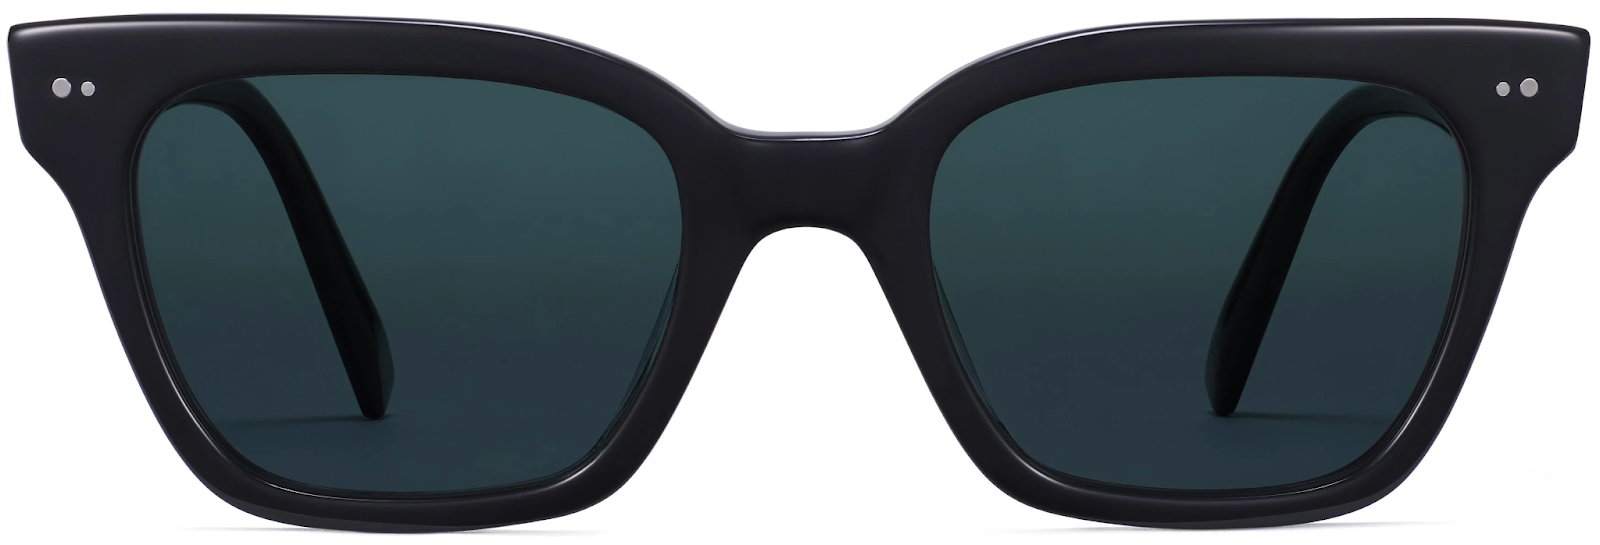 Warby Parker Beale Sunglasses